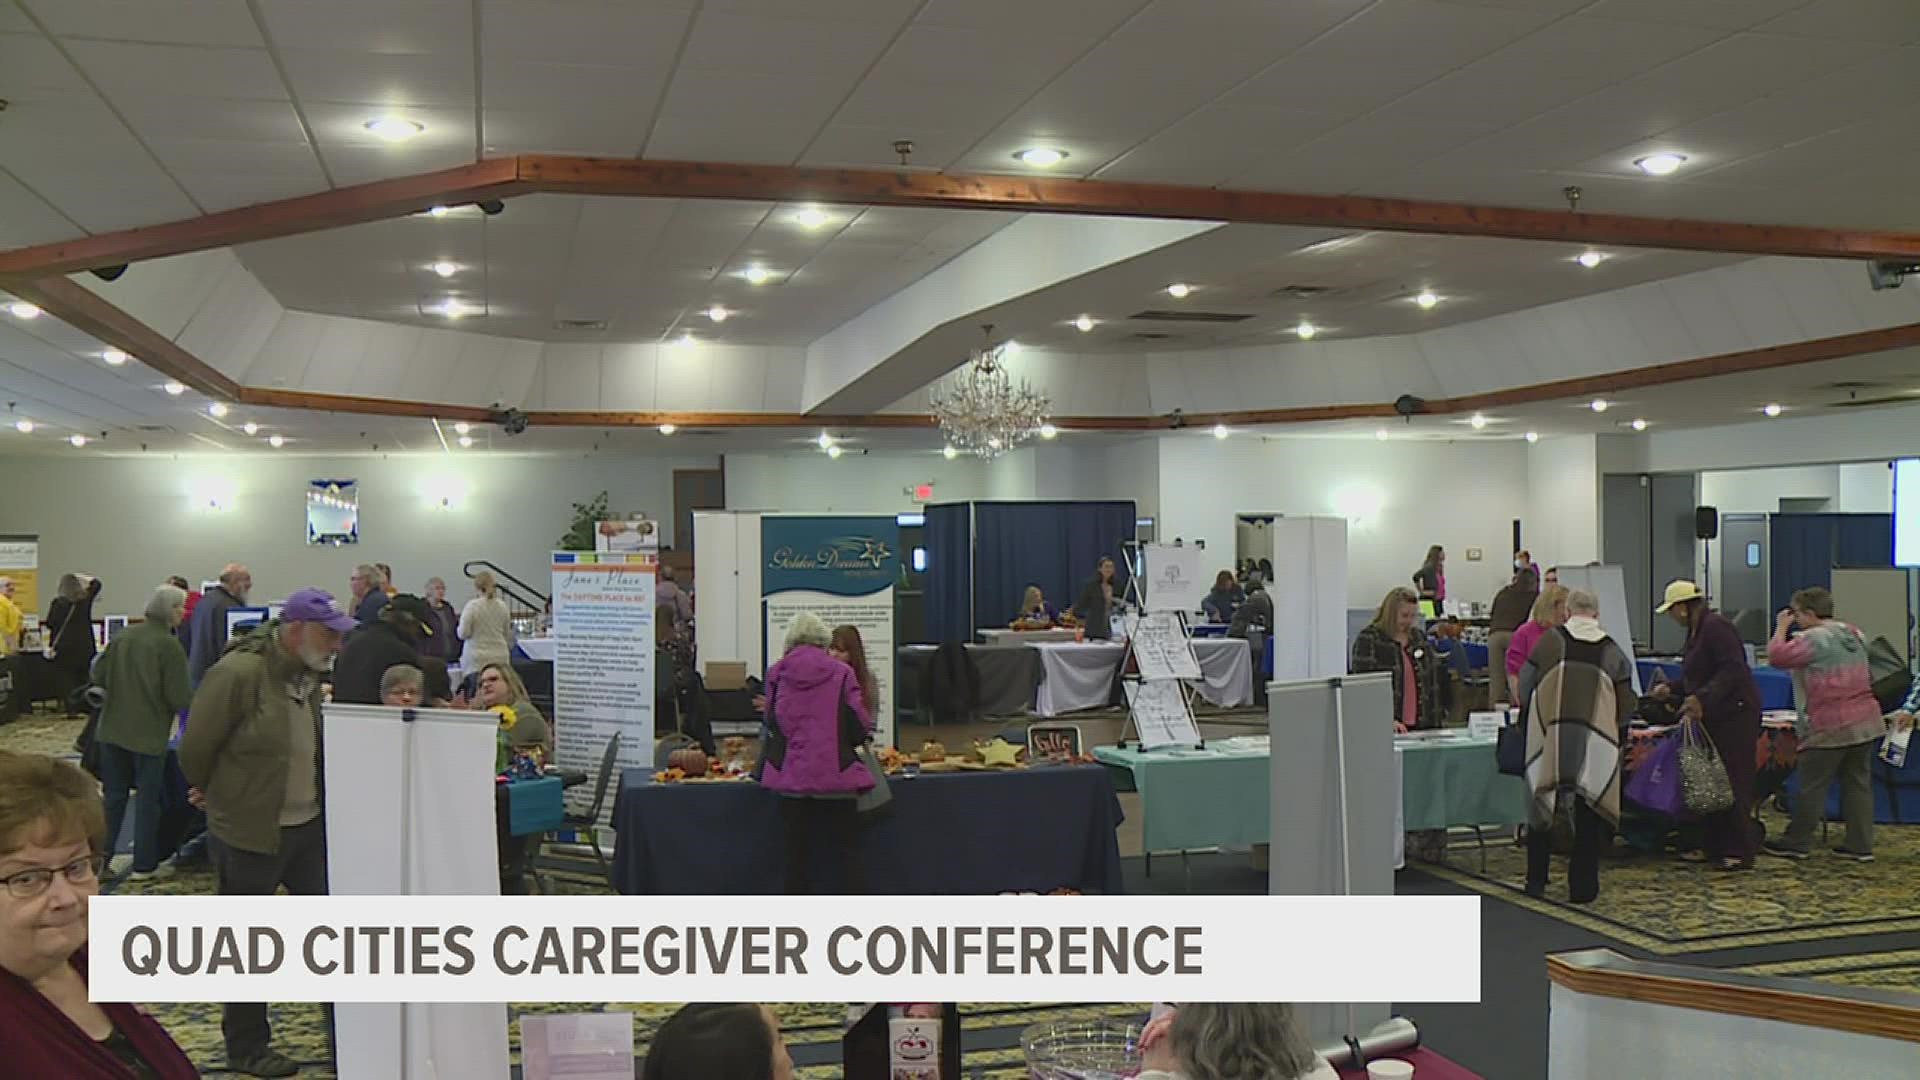 Attendees learned about resources for caregivers from more than 40 vendors at the Golden Lead Center in Davenport.